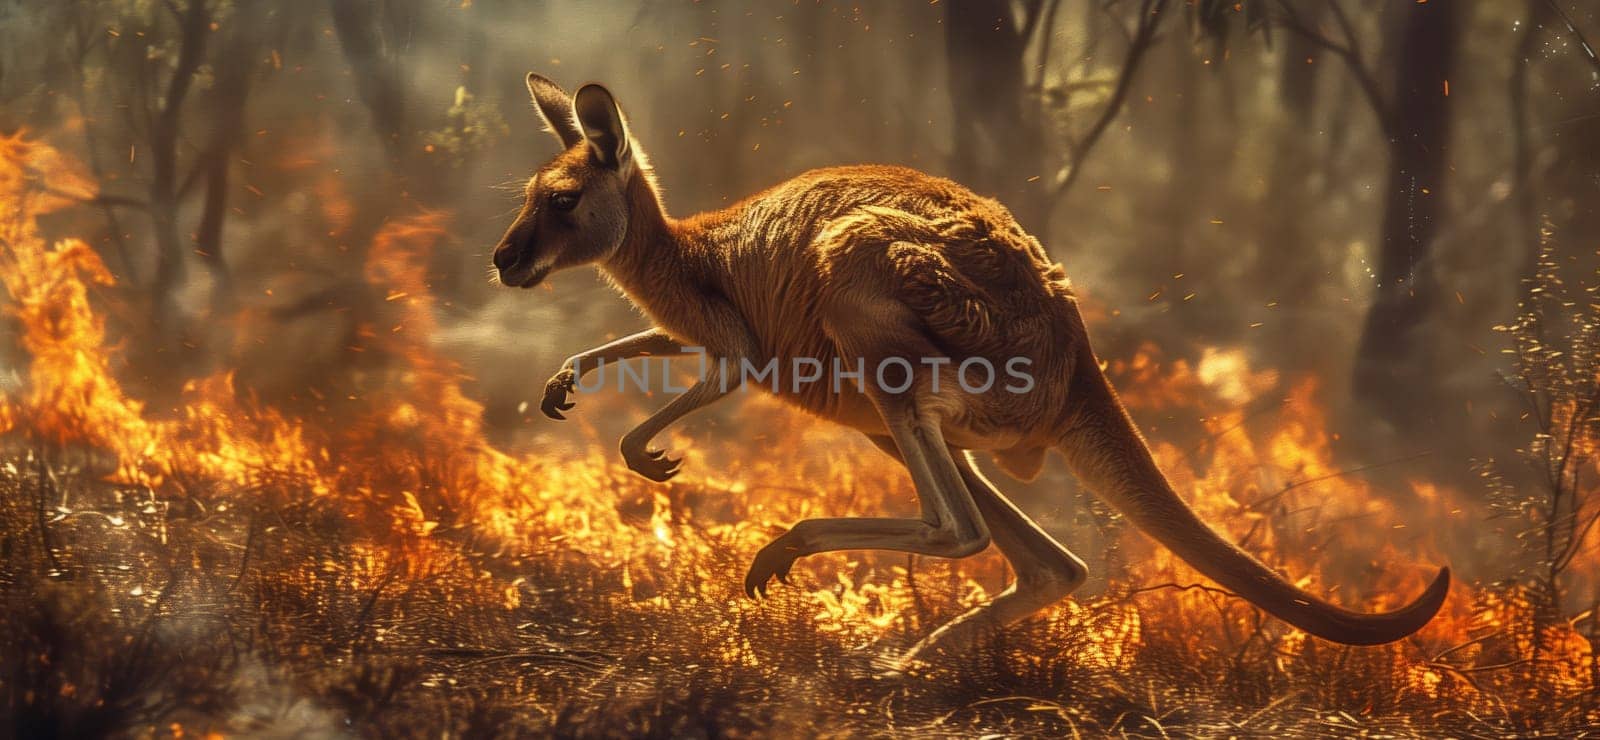 A carnivore is chasing a kangaroo through a fiery field by richwolf